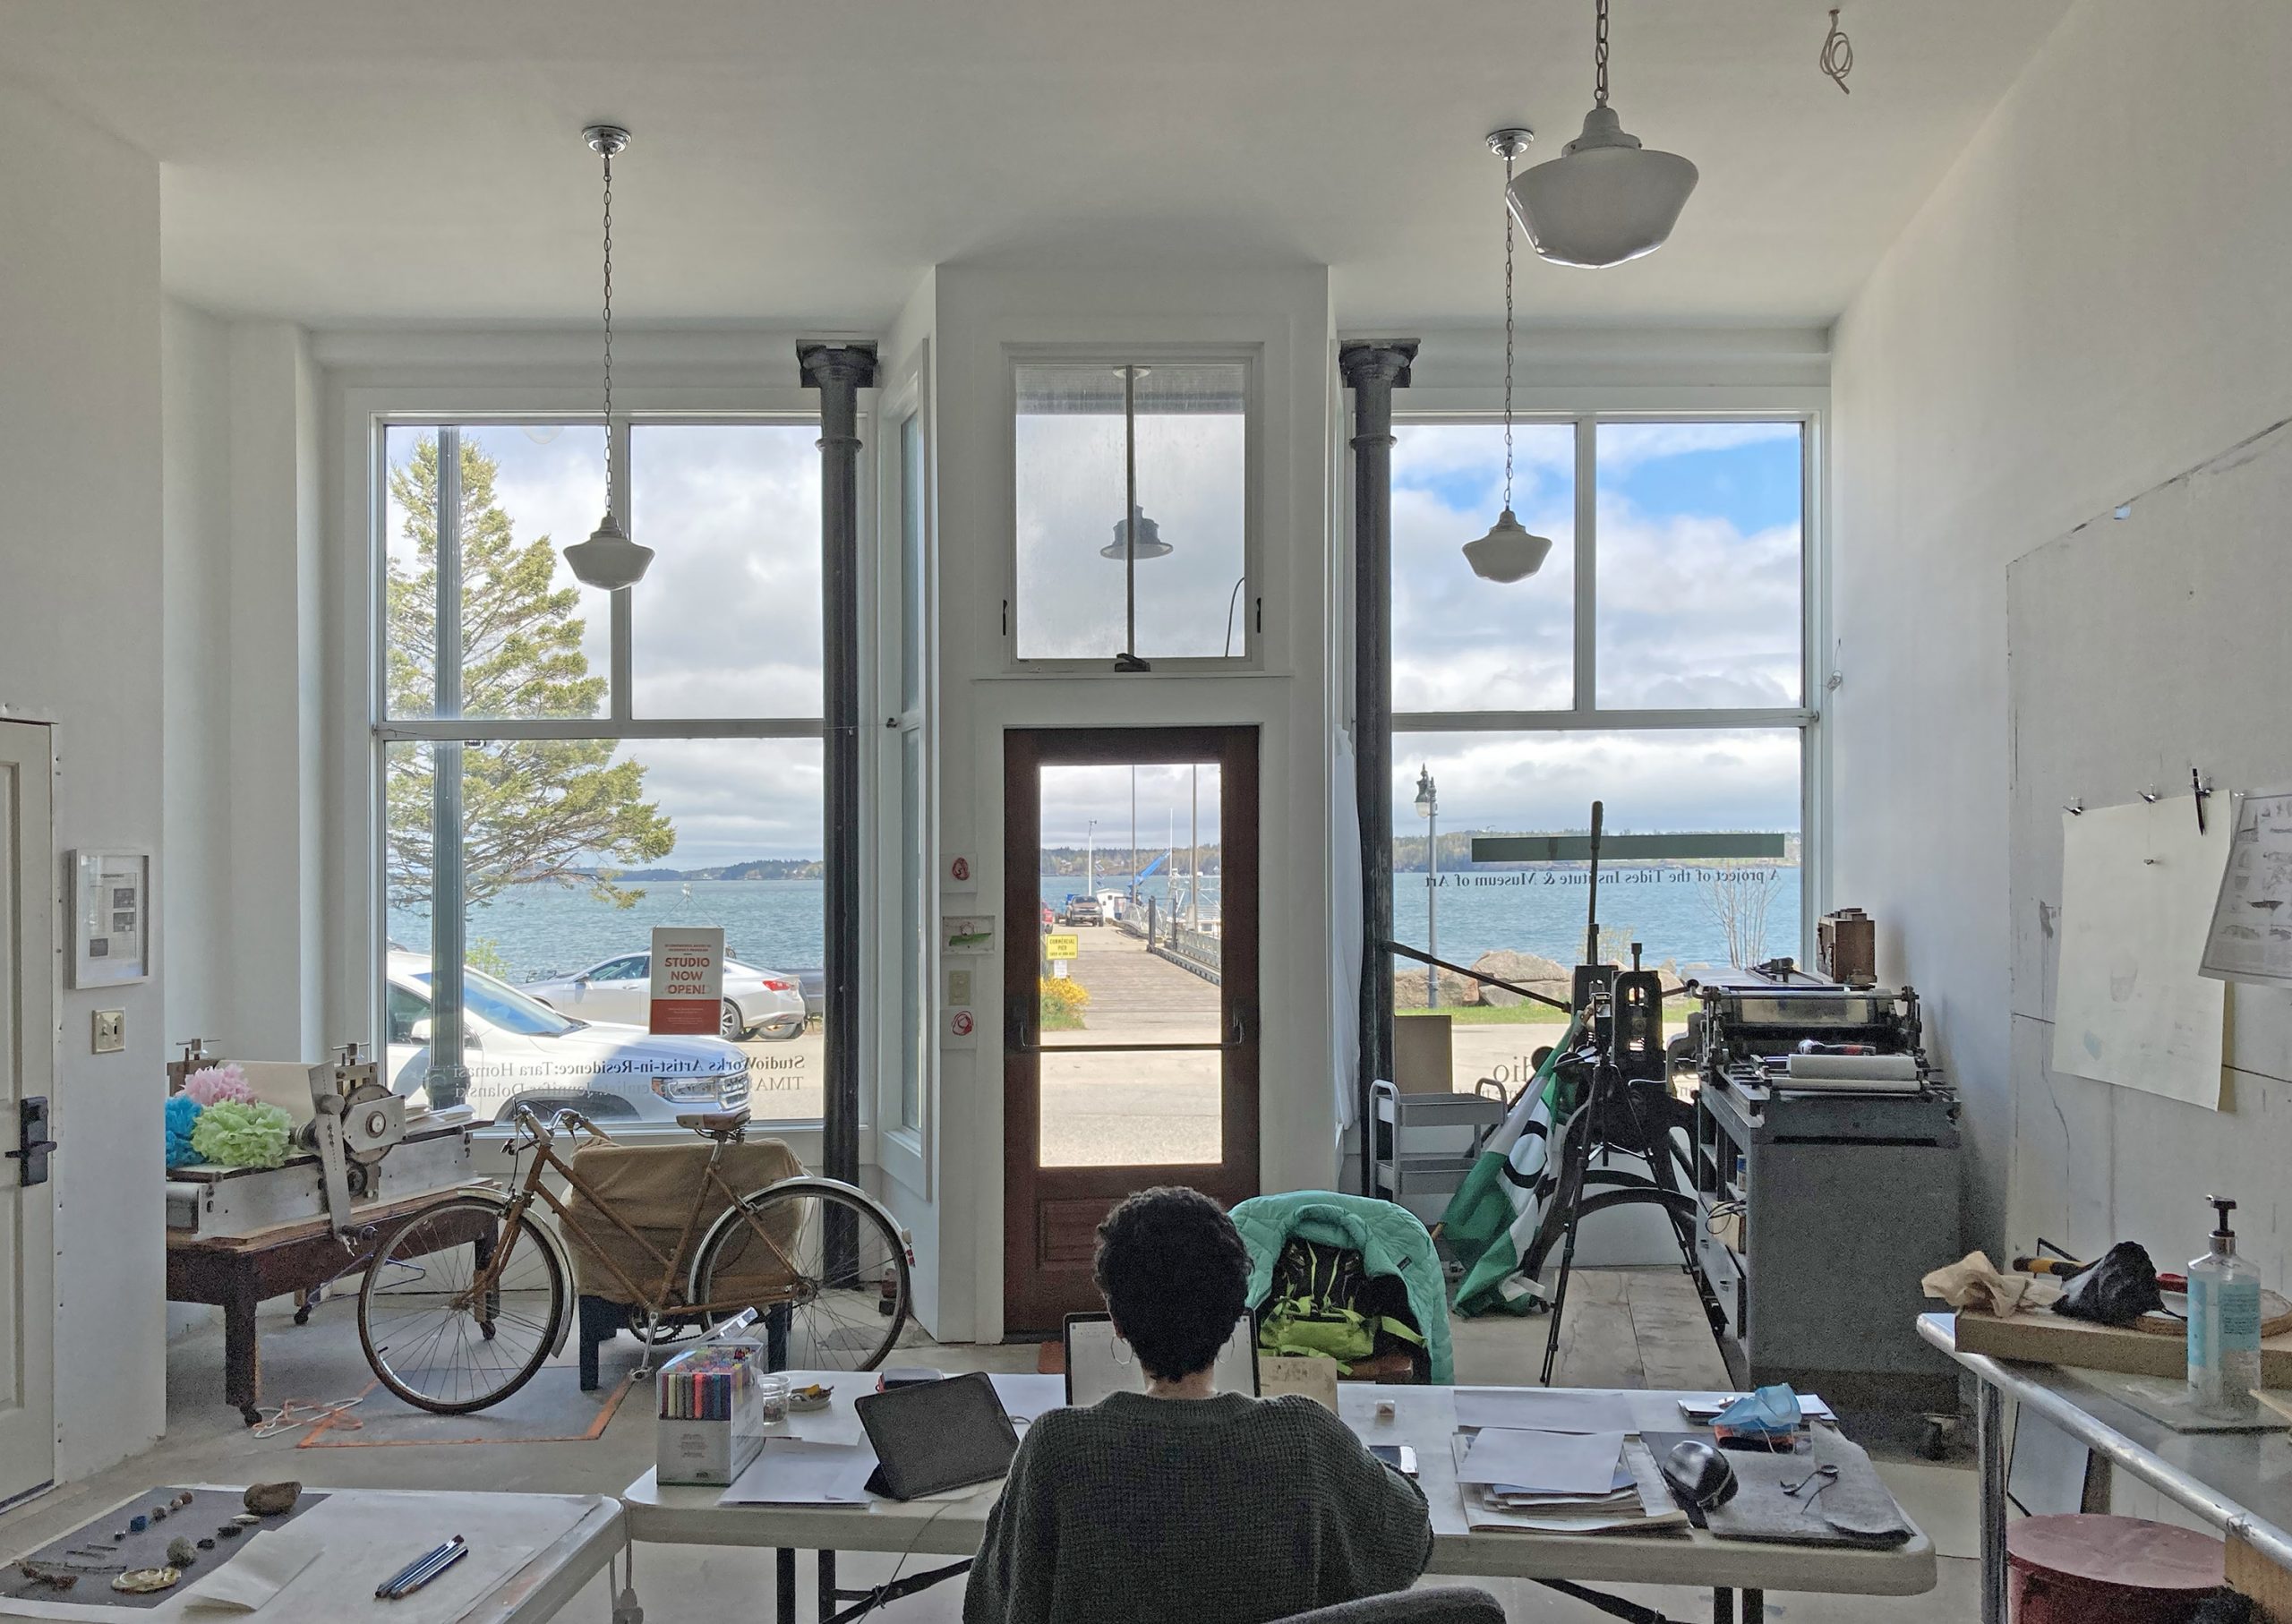 Located in Maine, StudioWorks offers visual artists and craftspeople space, time, and tide in this residency. Deadline to apply is February 1.